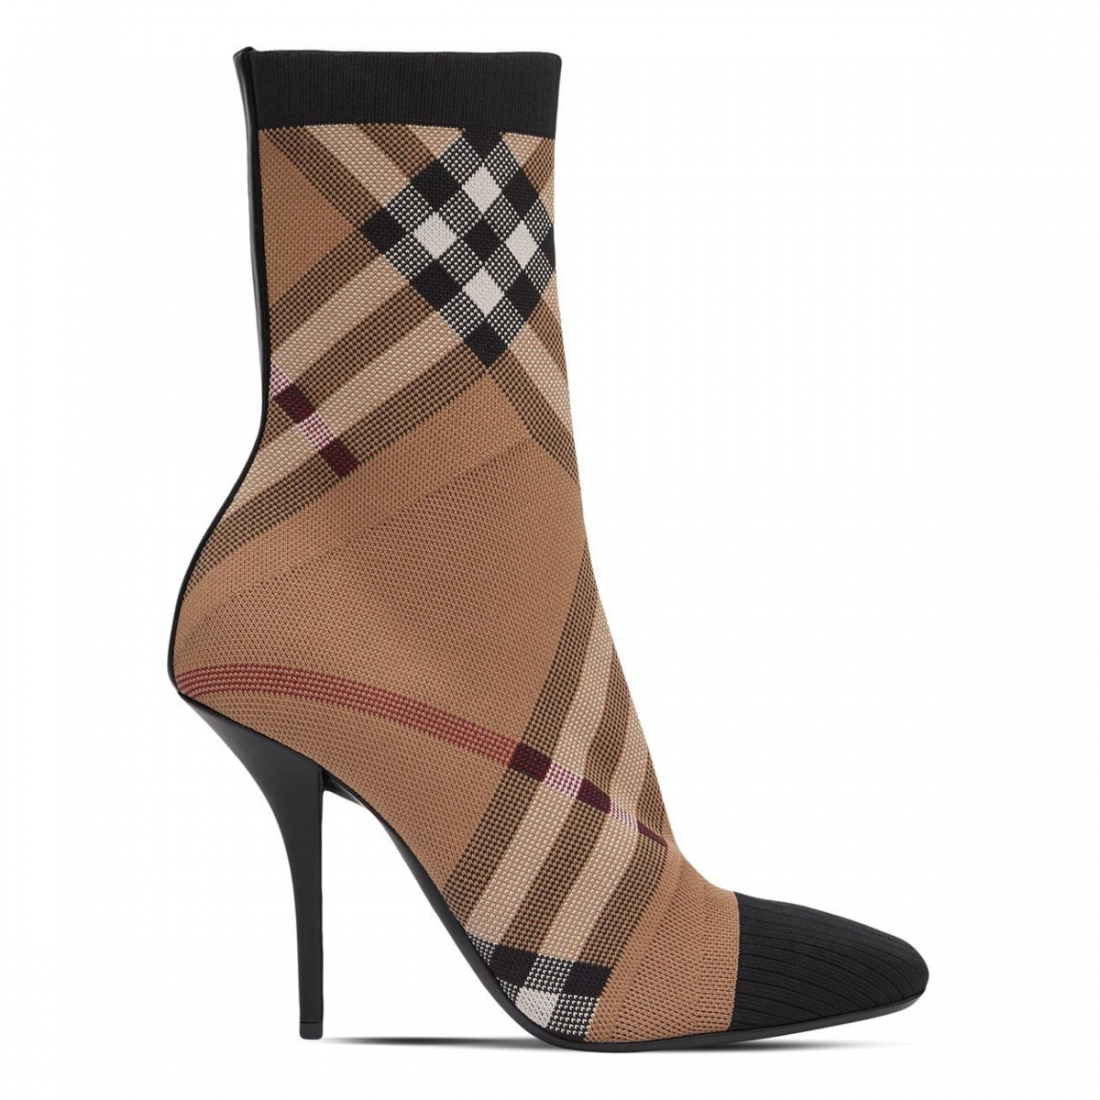 Women's 'Vintage Check Sock' High Heeled Boots